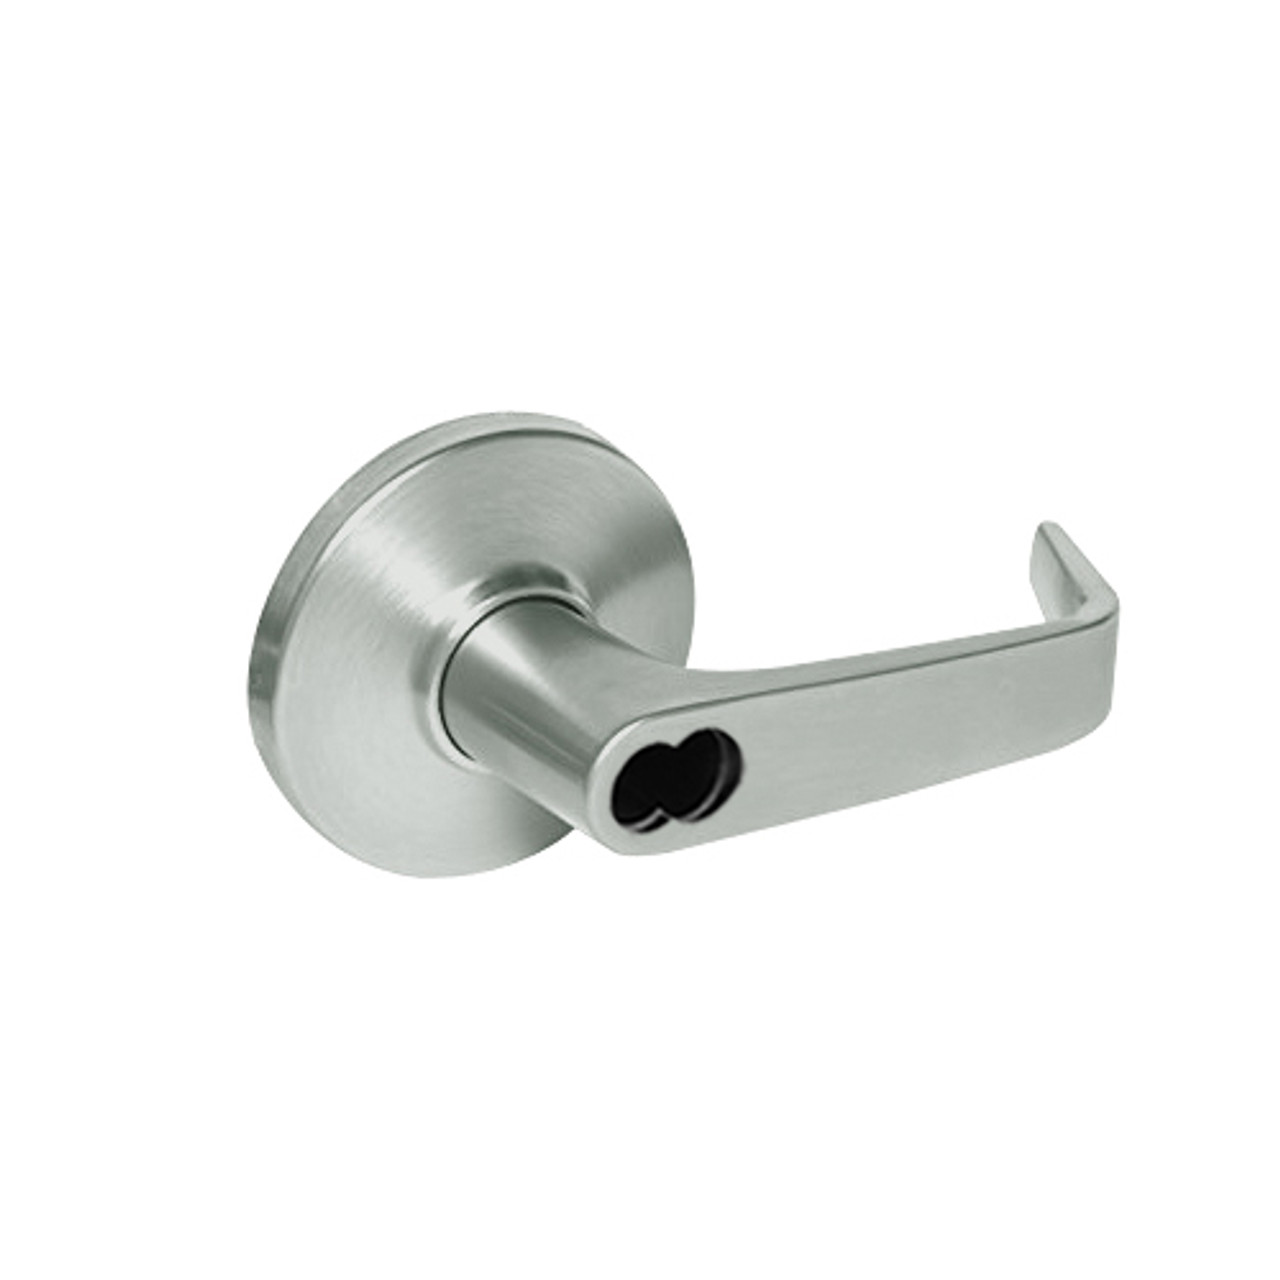 9K37YR15DS3618 Best 9K Series Special Function Cylindrical Lever Locks with Contour Angle with Return Lever Design Accept 7 Pin Best Core in Bright Nickel